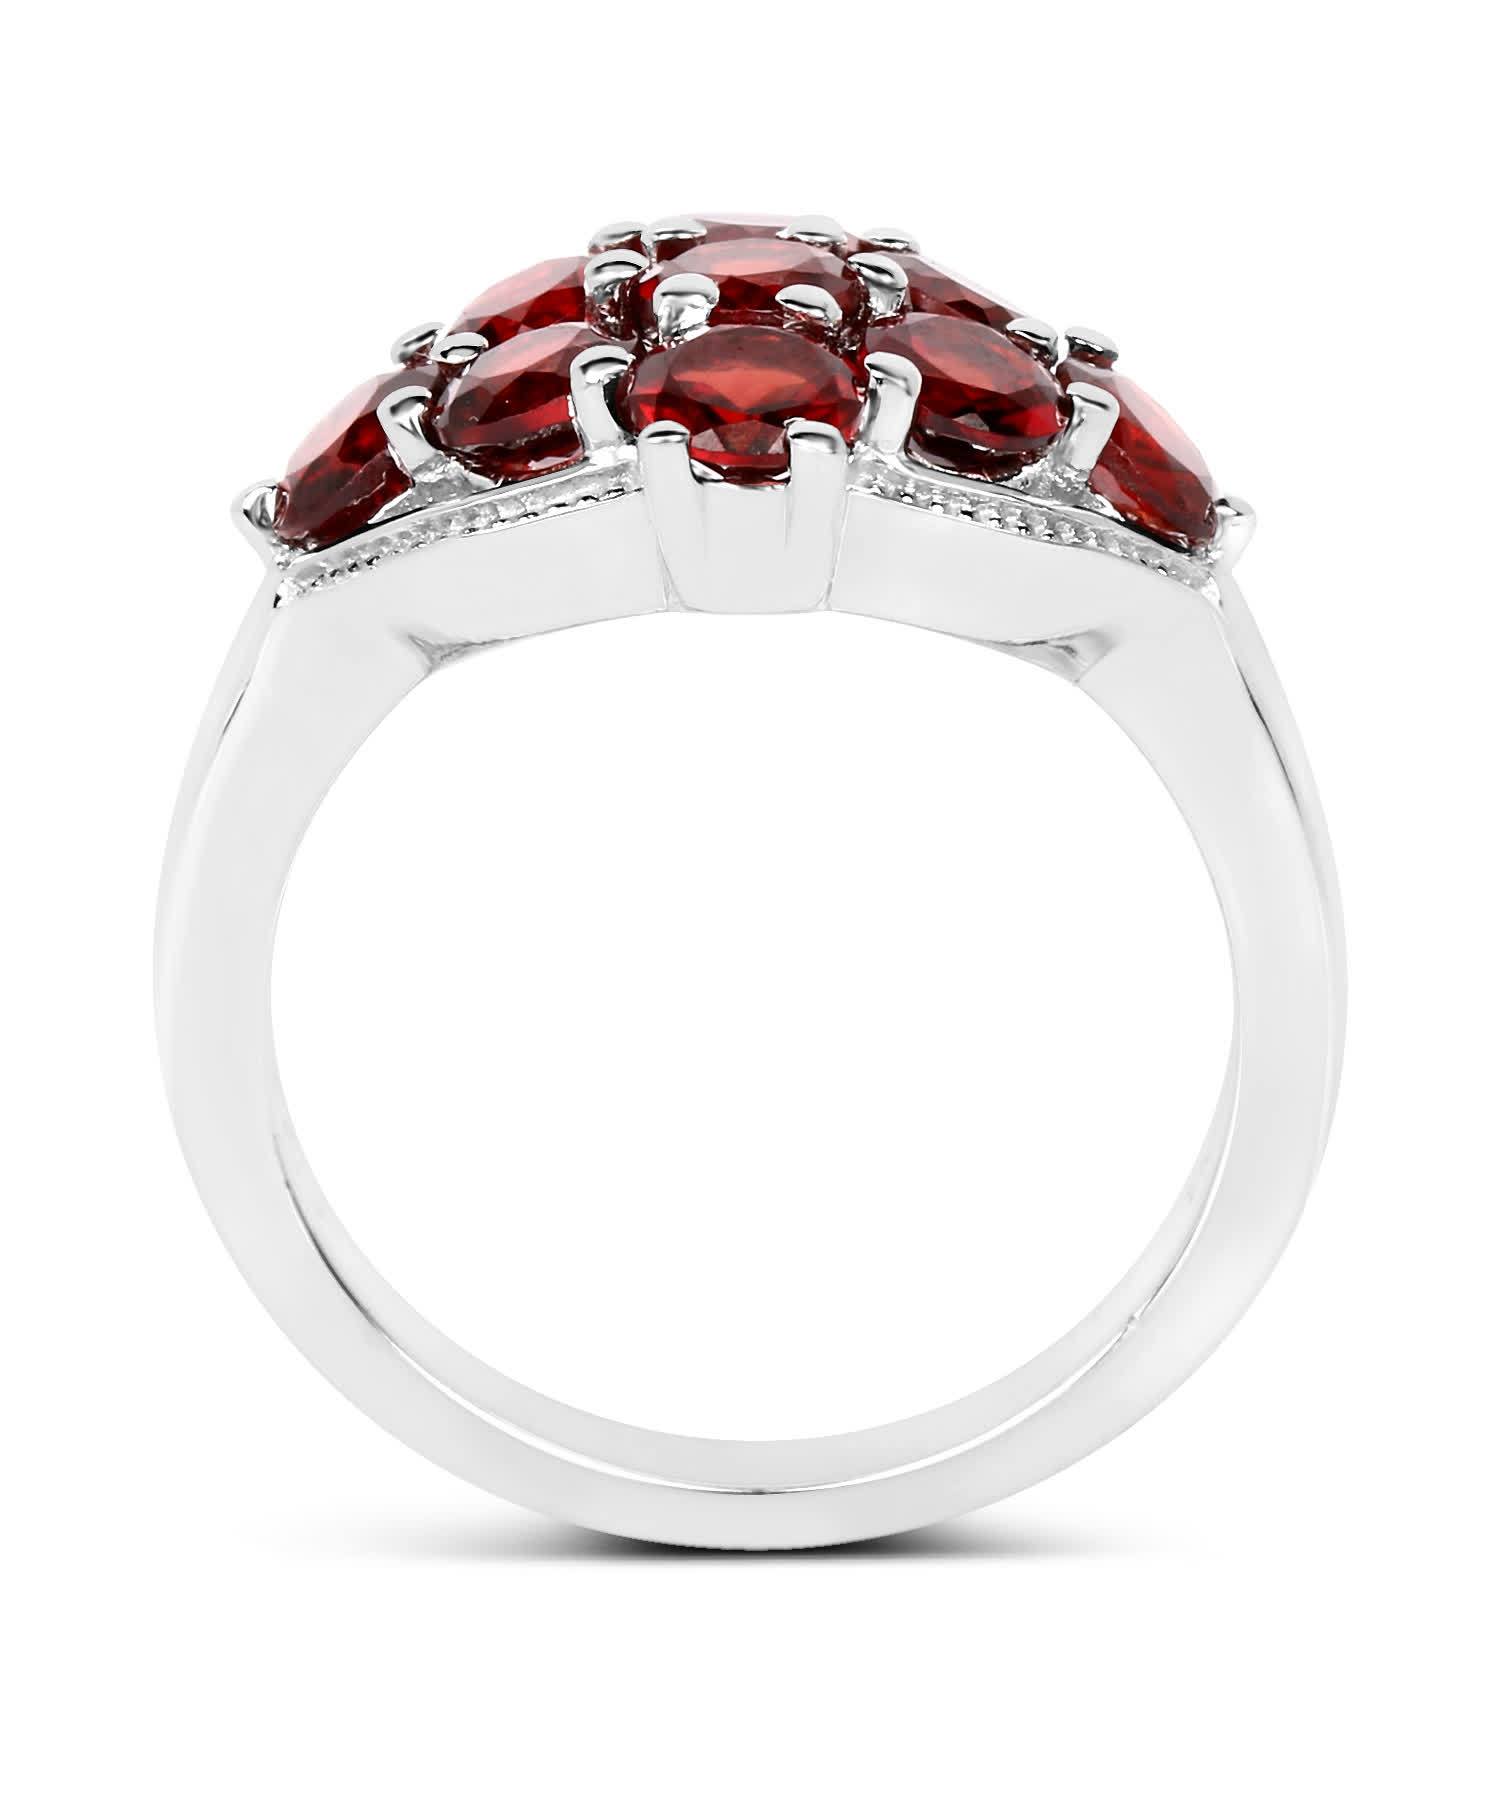 2.88ctw Natural Pomegranate Garnet Rhodium Plated 925 Sterling Silver Right Hand Ring View 2